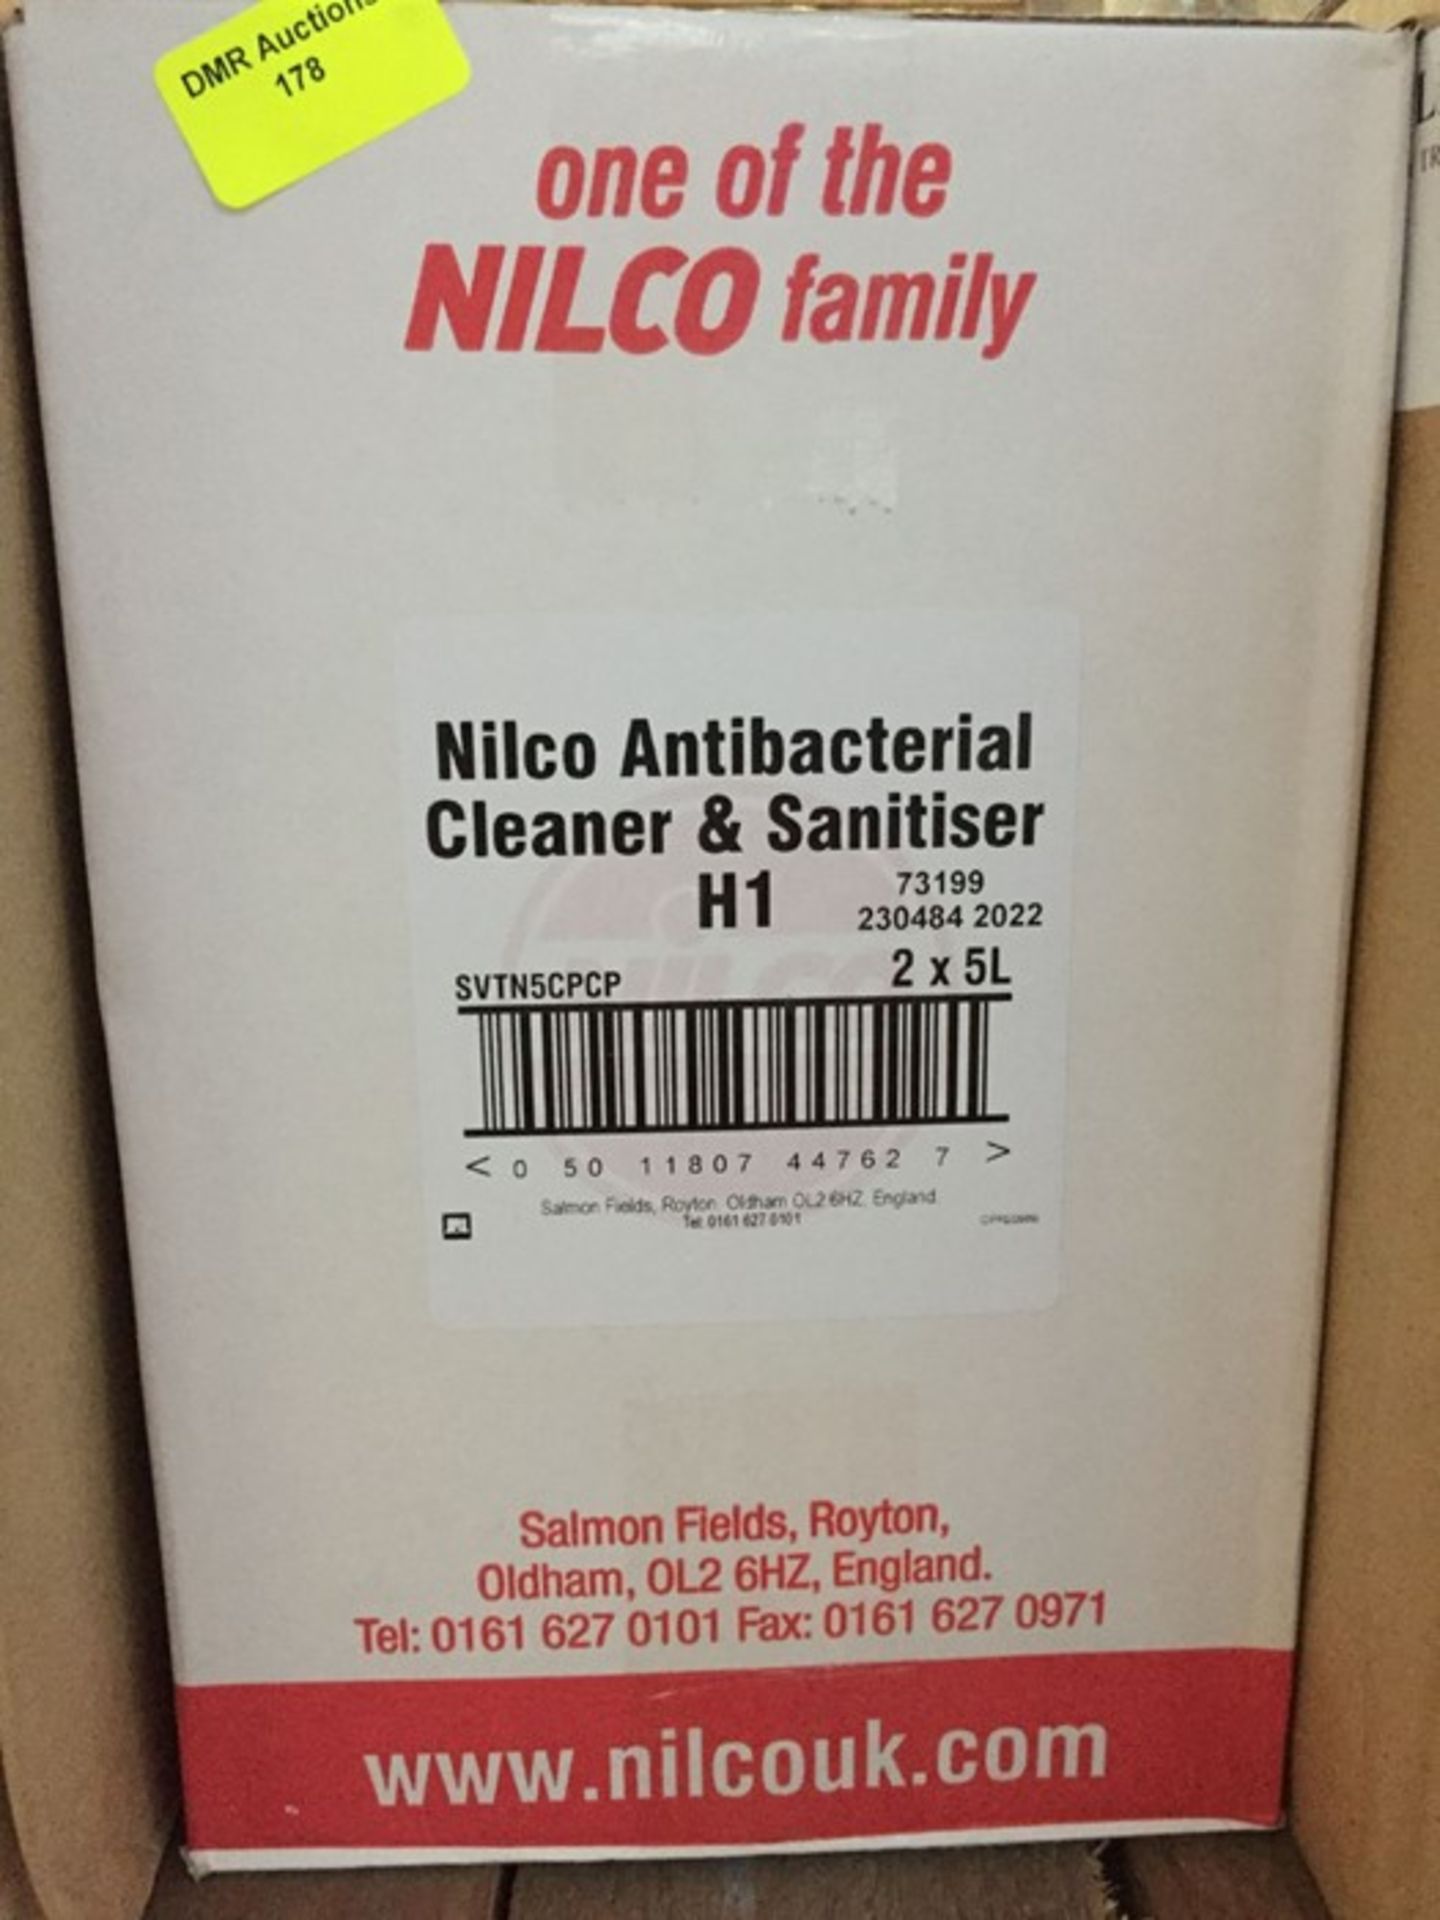 ONE LOT TO CONTAIN 2 5L TUBS OF NILCO ANTIBACTERIAL CLAENER & SANITISER